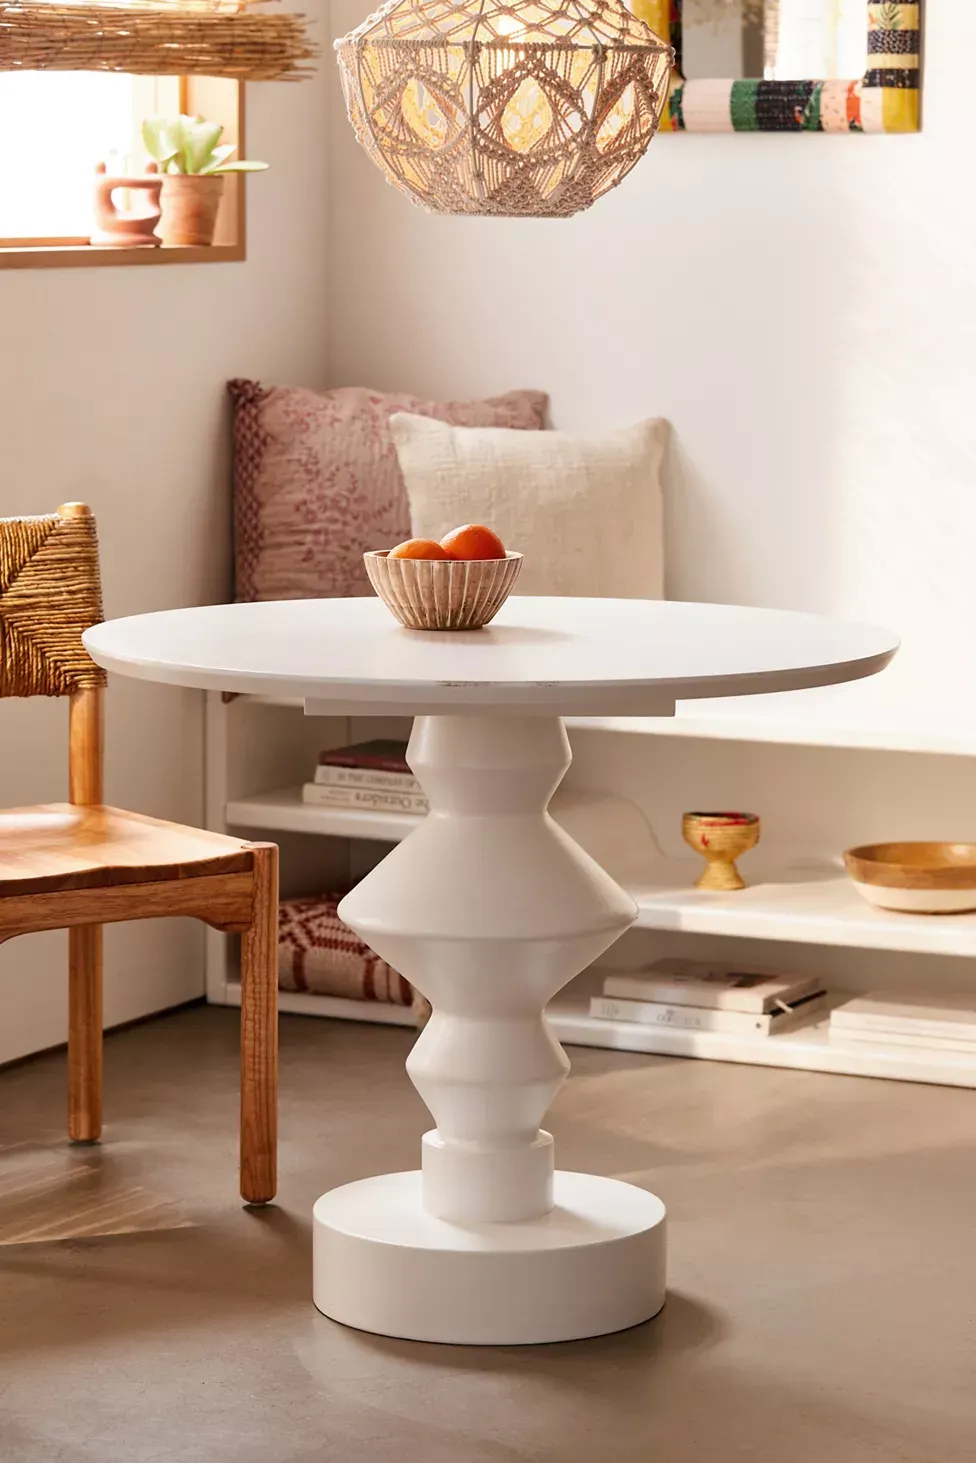 http://cdn.apartmenttherapy.info/image/upload/v1689605184/gen-workflow/product-database/urban-outfitters-vera-pedestal-table.webp